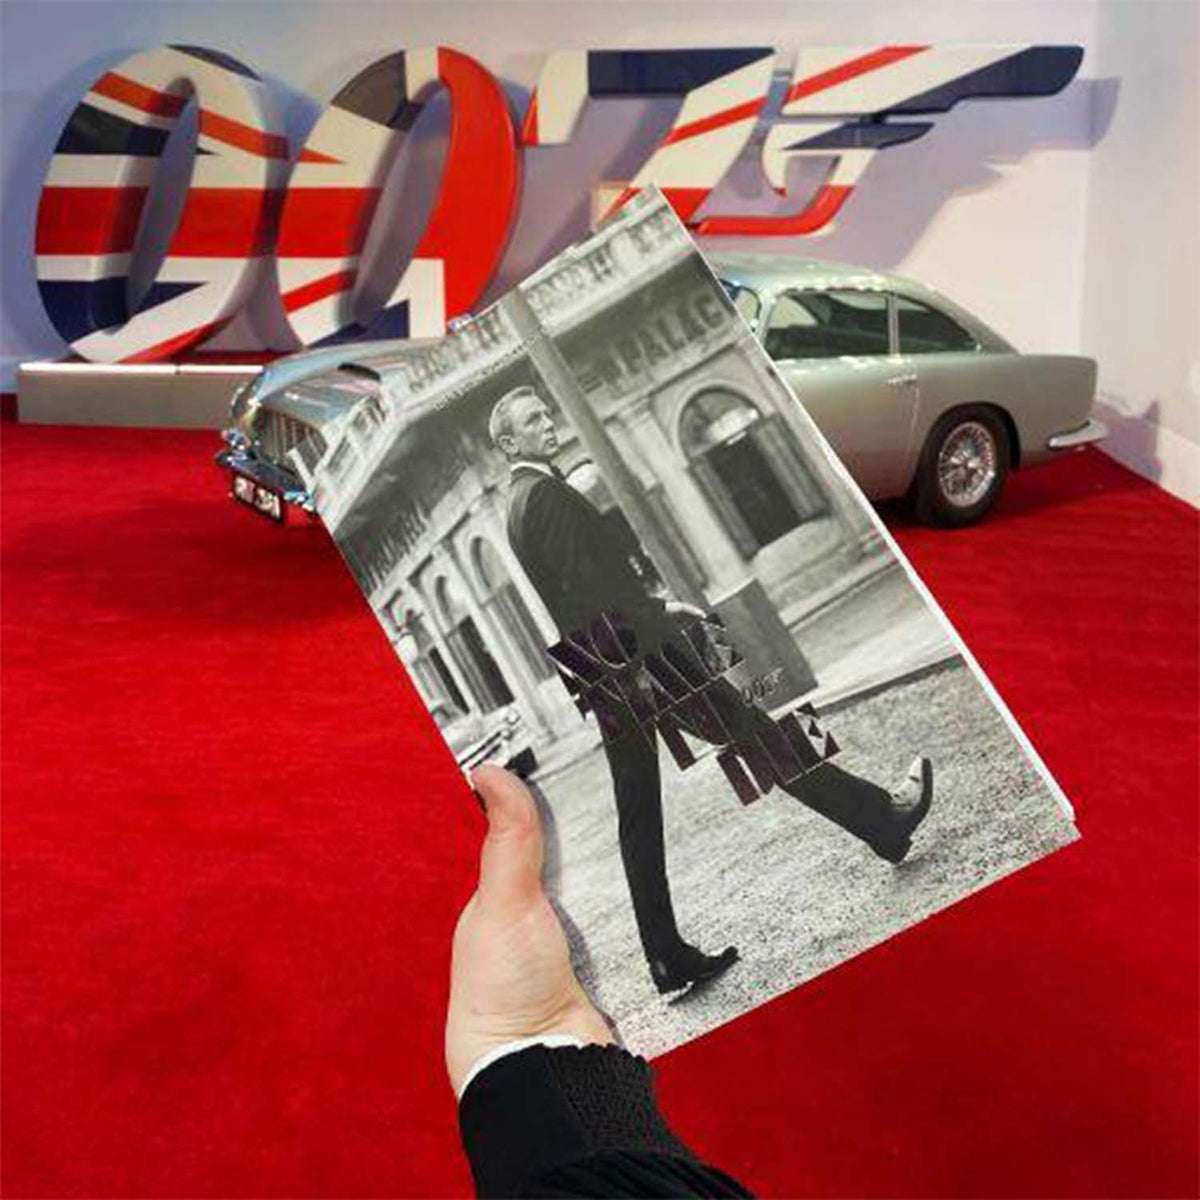 James Bond No Time To Die Royal World Premiere Programme - Signed Edition auction 007Store 